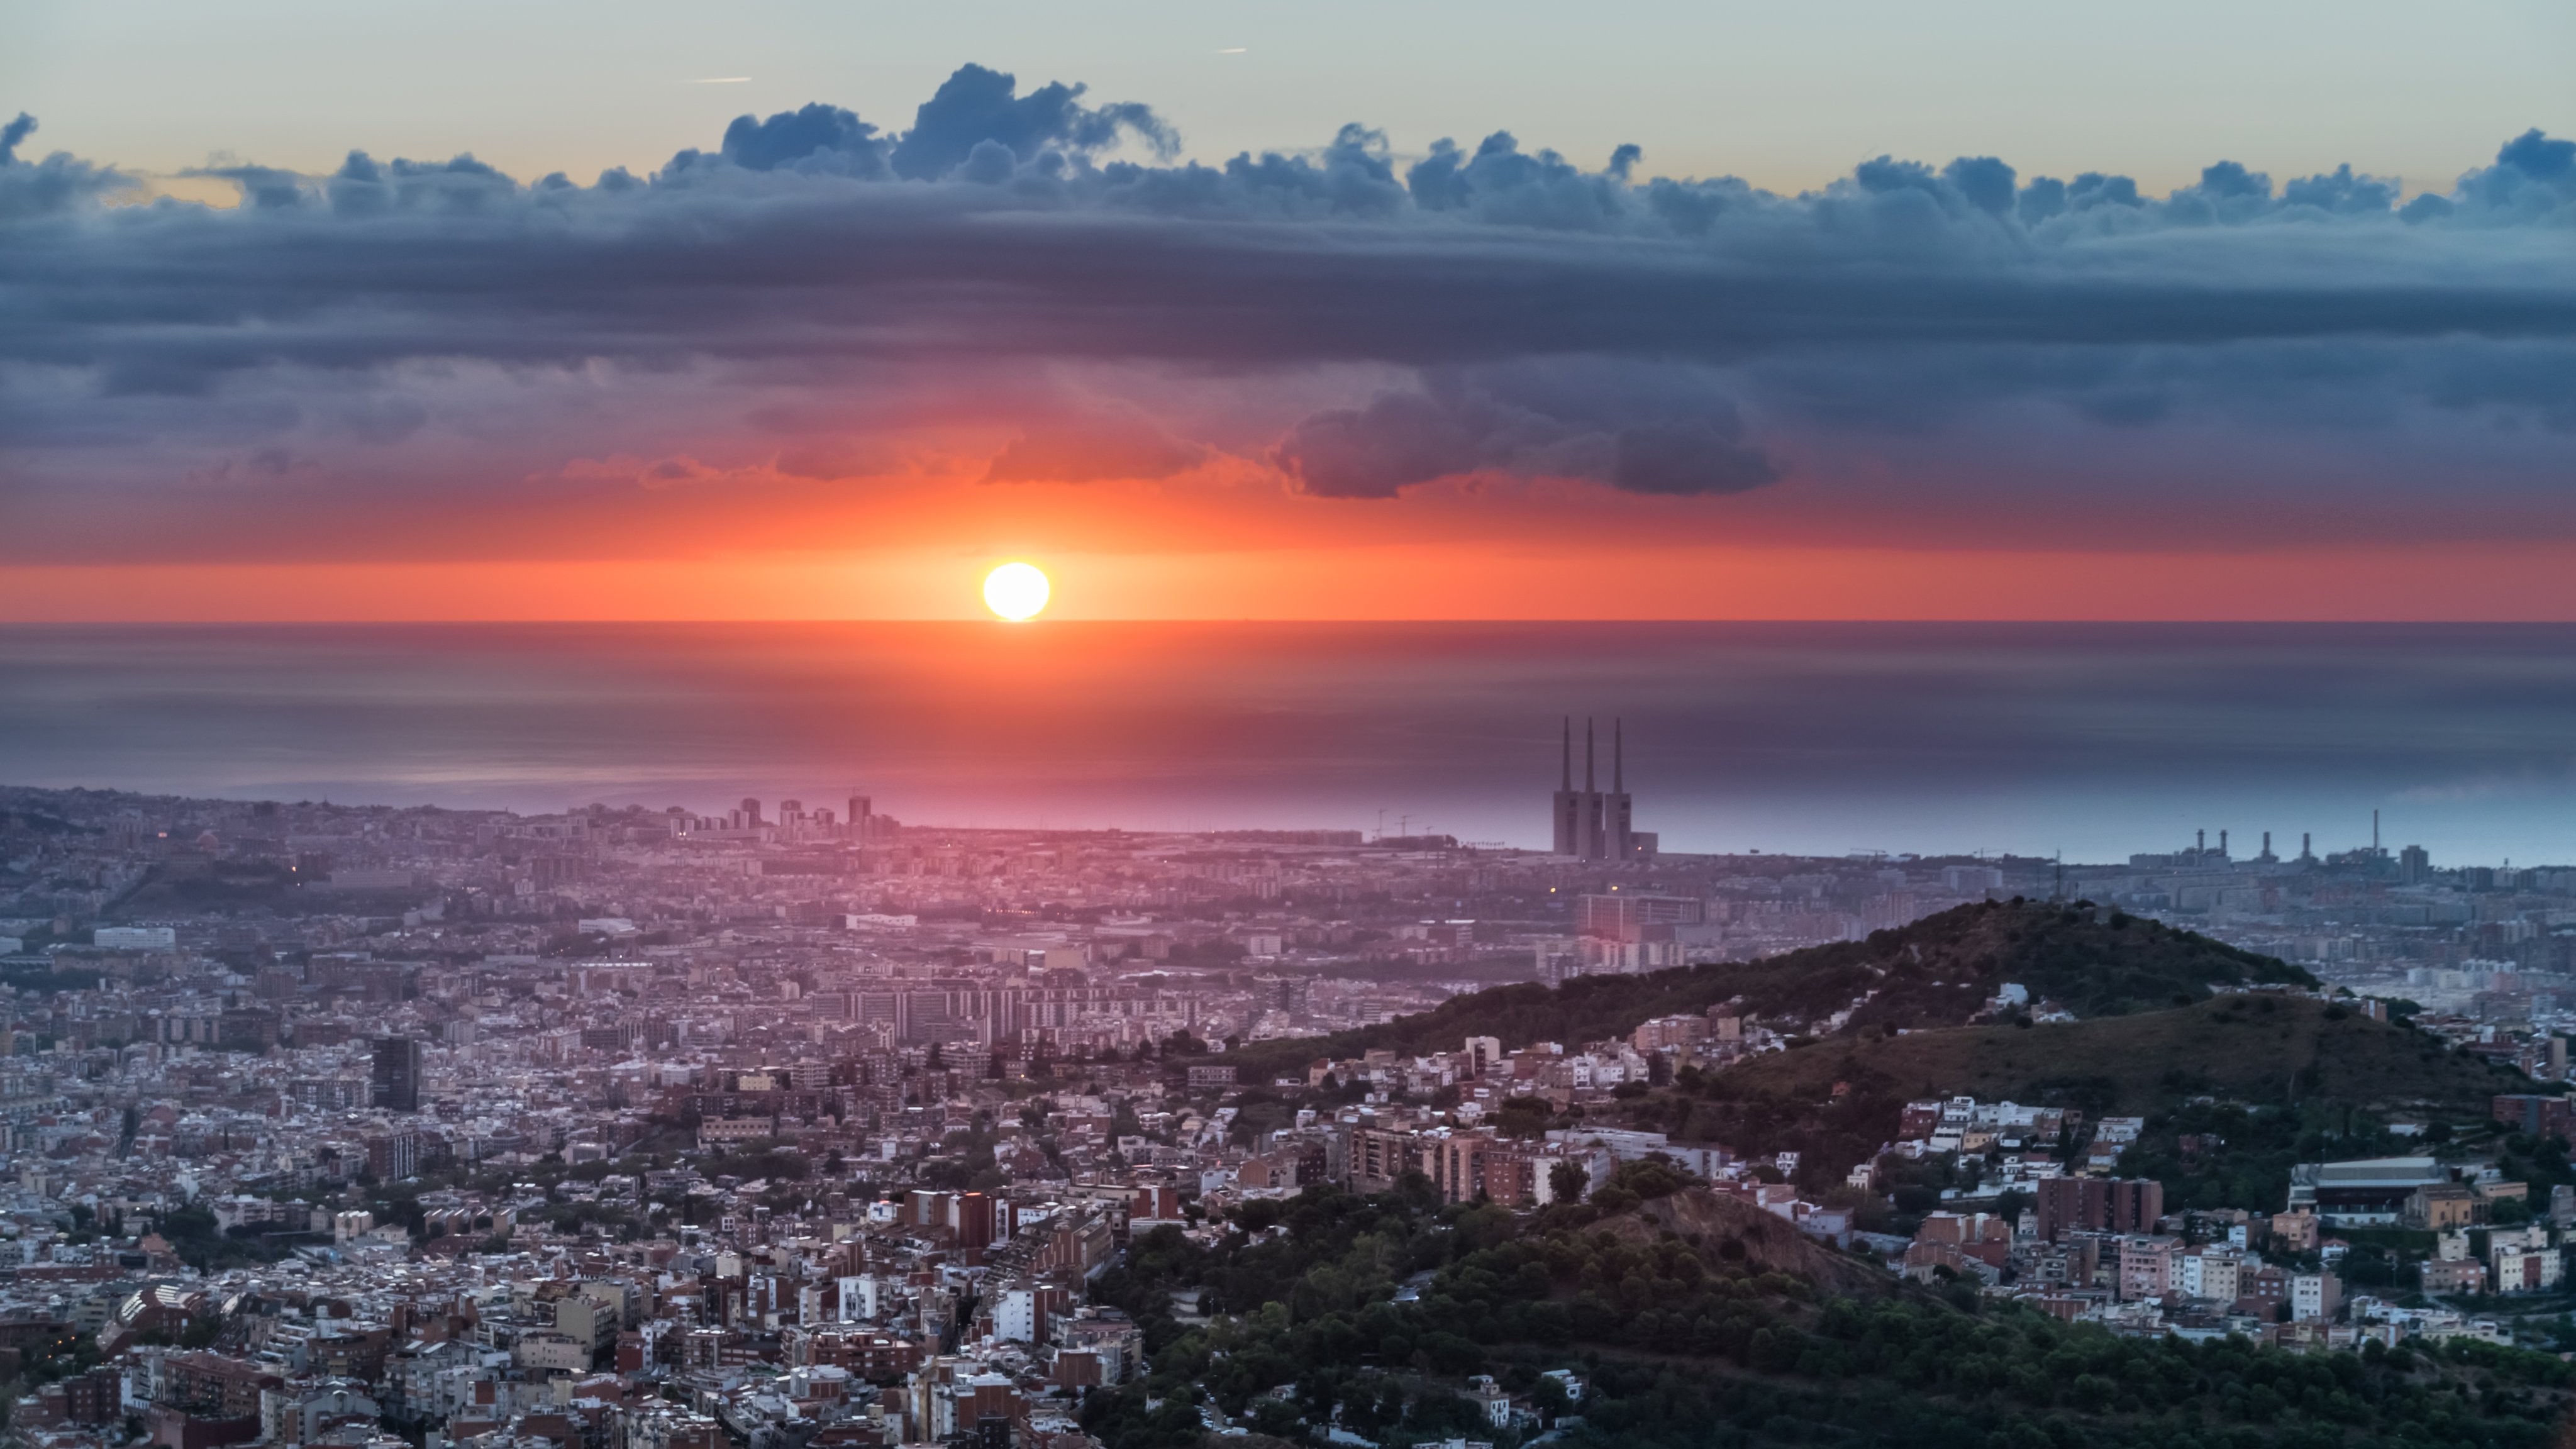 2nd Place Beautiful #sunrise from Fabra Observatory Barcelona by Alfons Puertas @alfons_pc